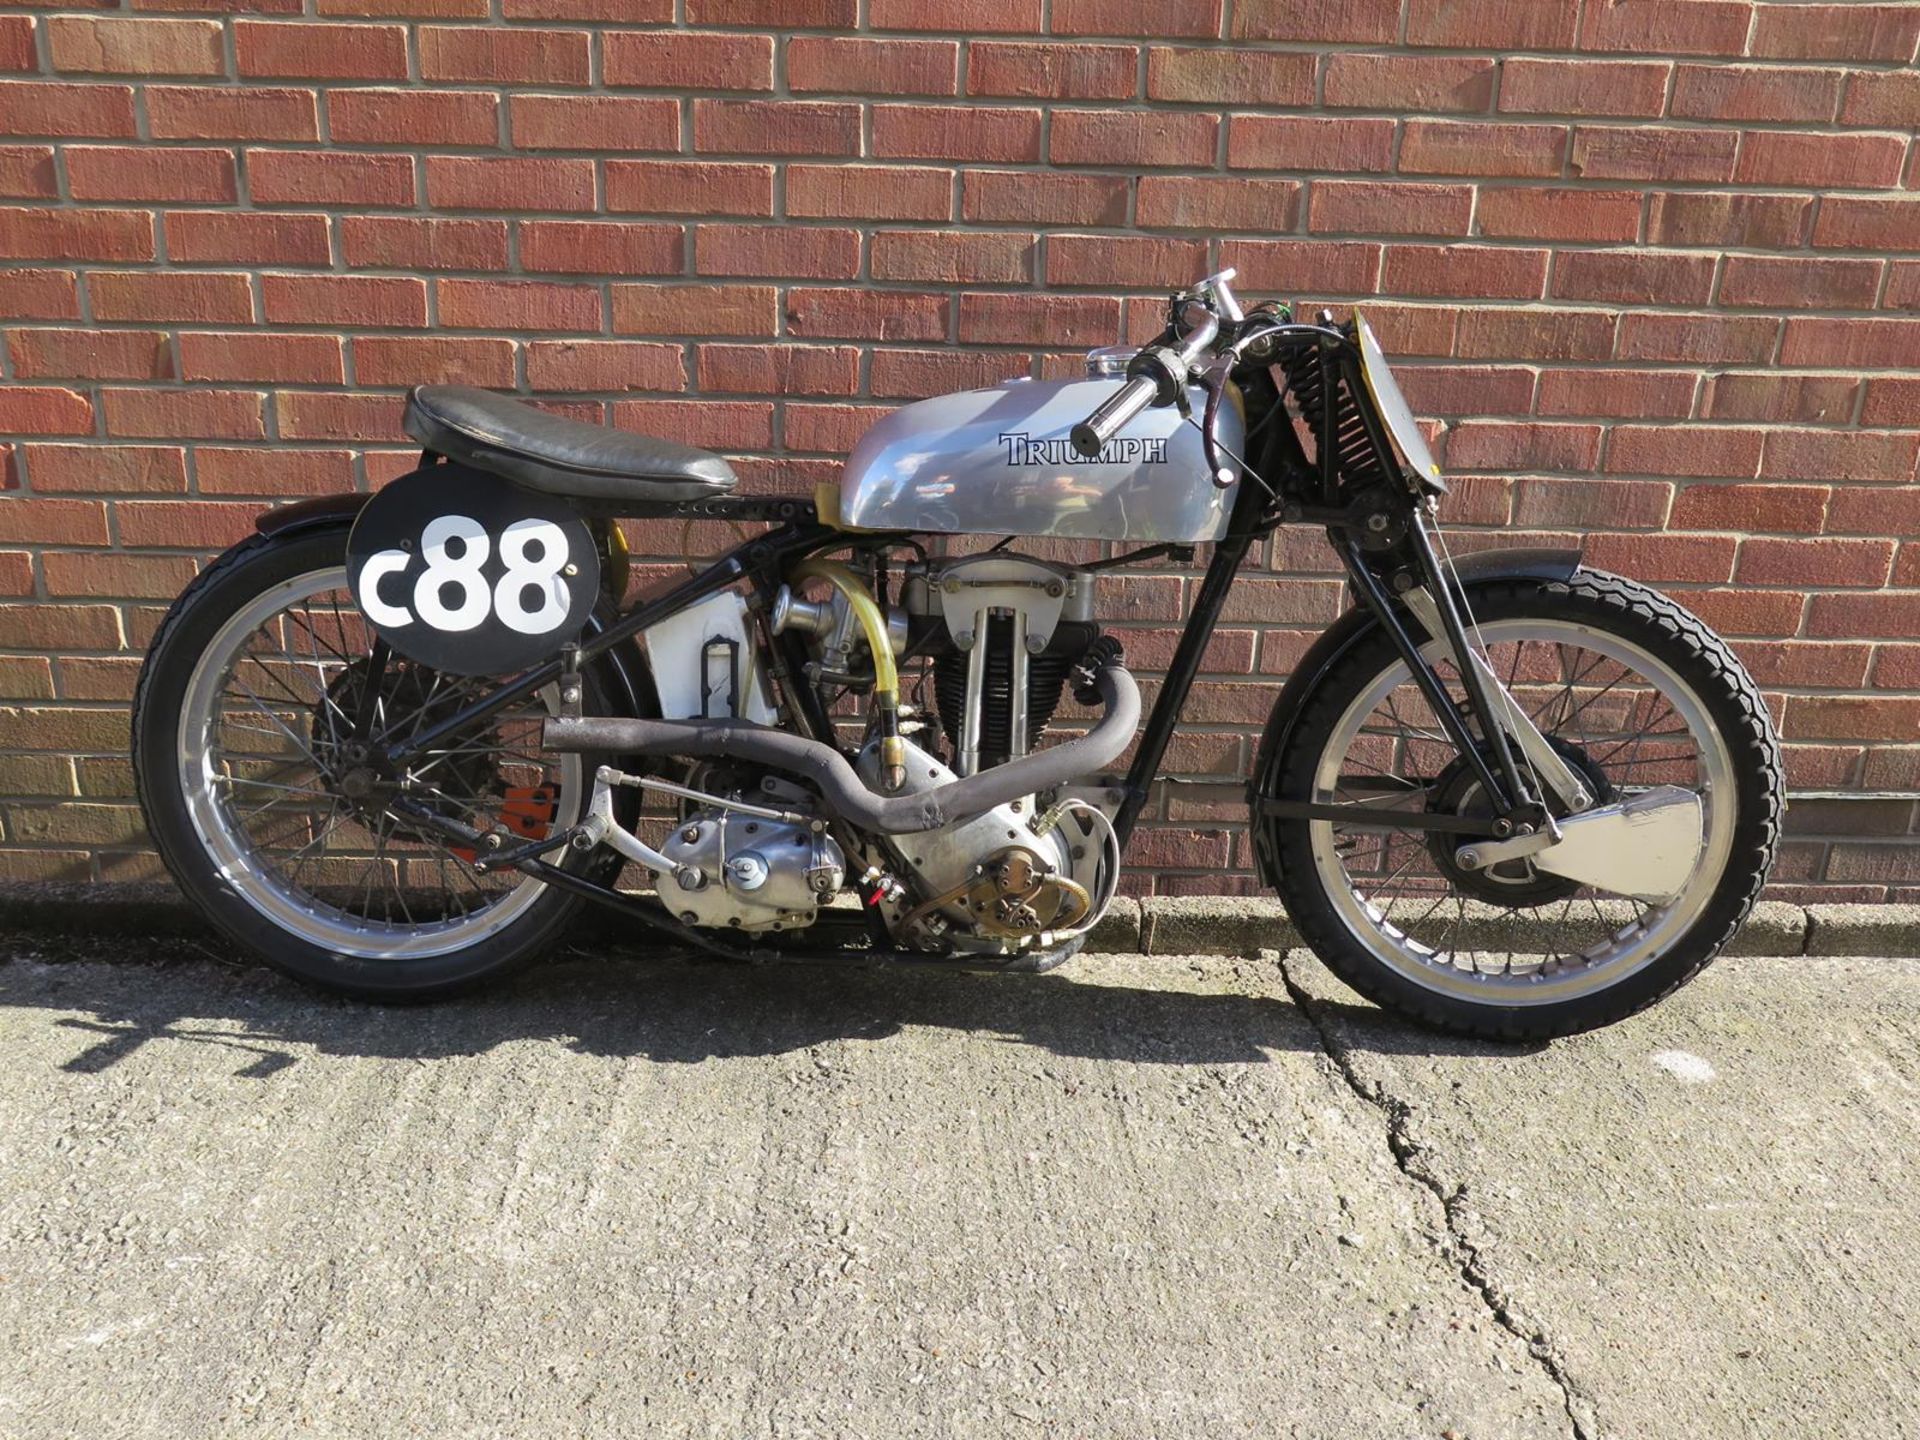 A 1937 Triumph Tiger 70 400 Purchased new in 1937 by Geoffrey Pollard Later converted for racing